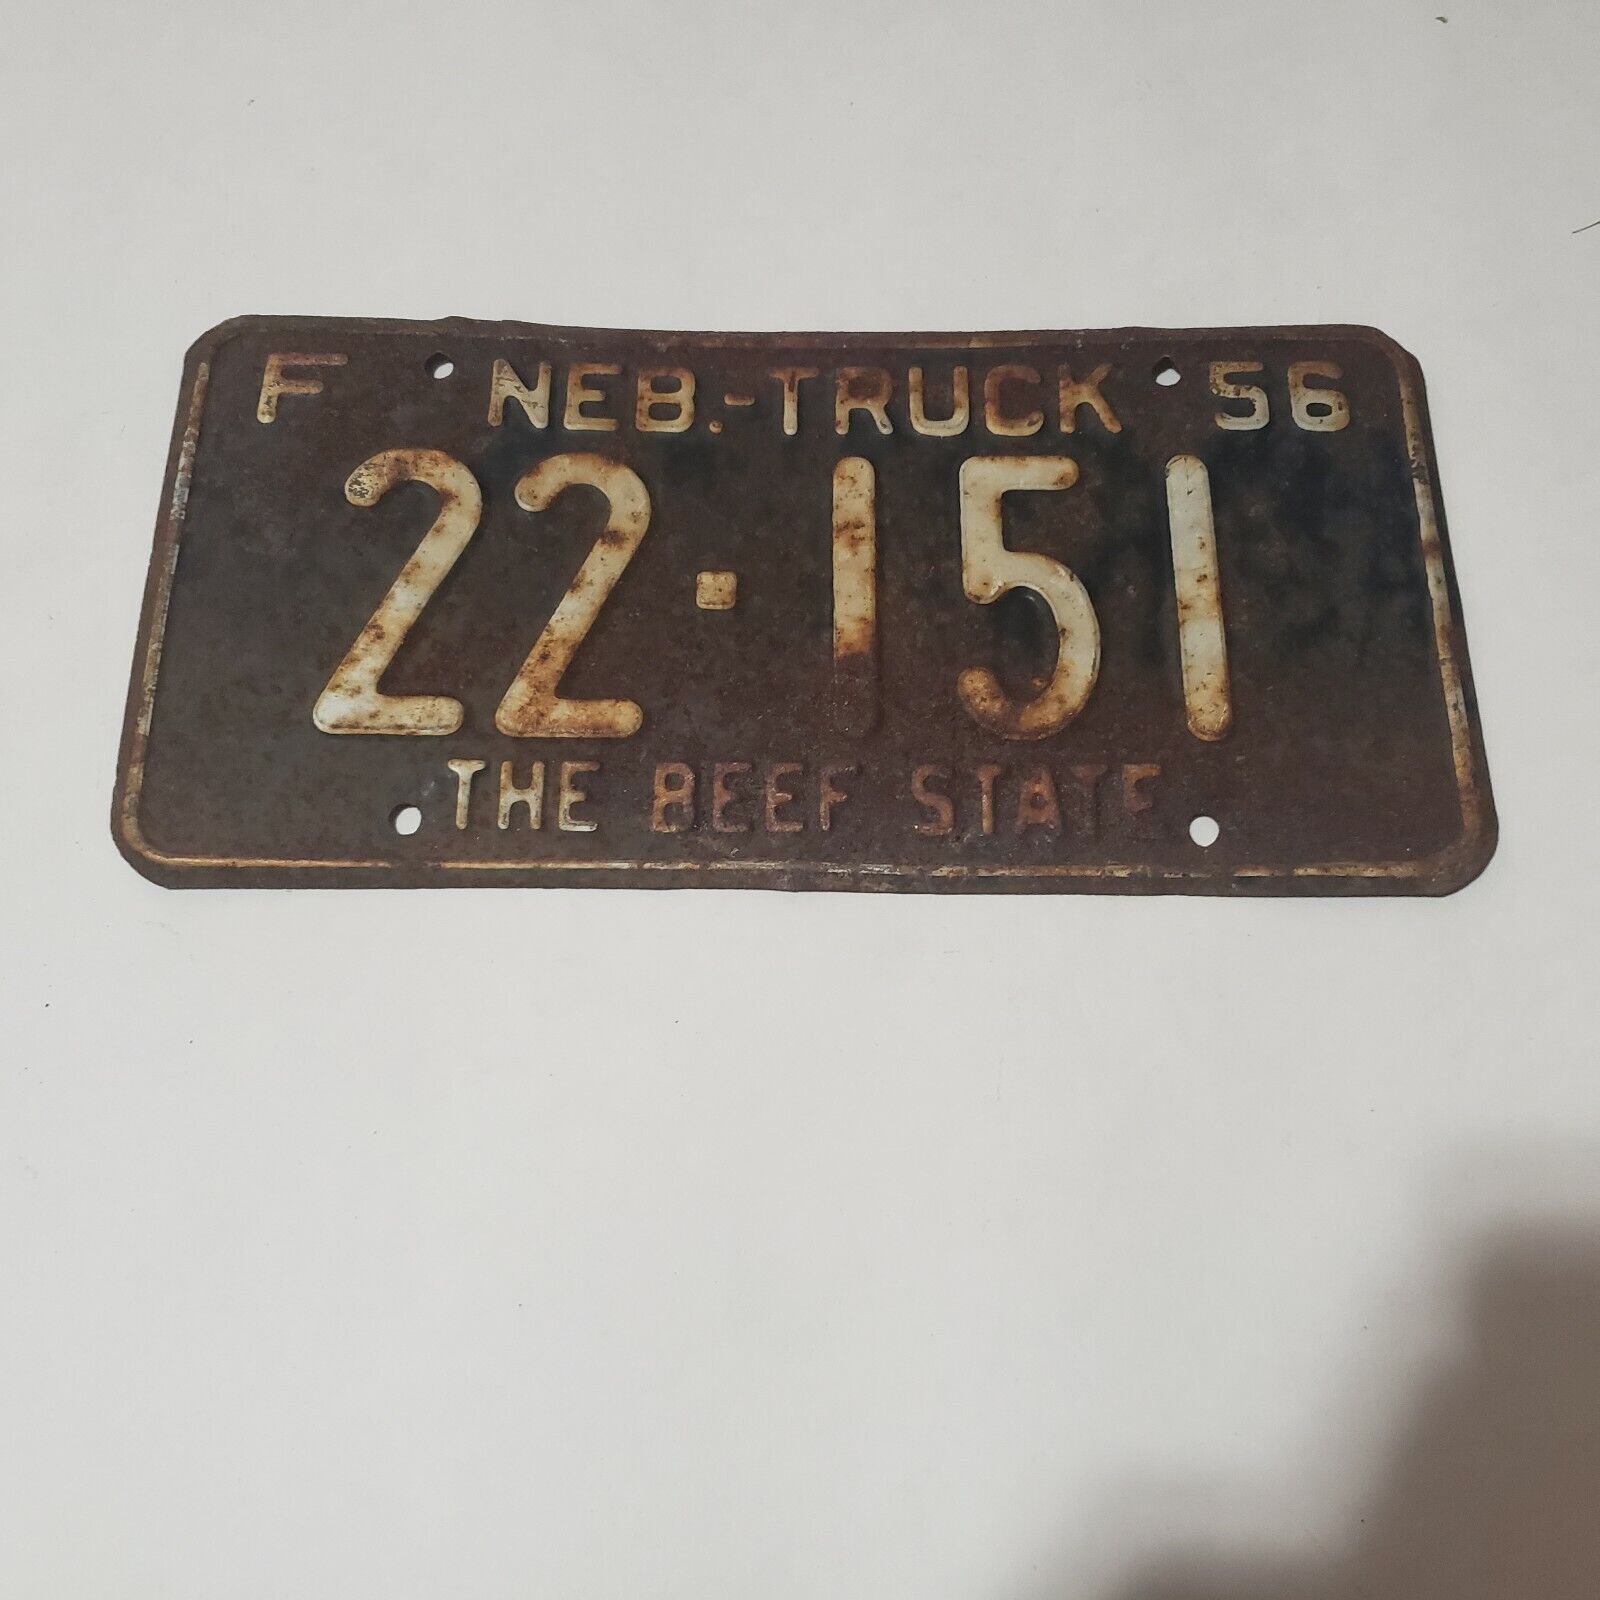 1956 1957 1958 1959 1960 Nebraska Beef State License Plates -Select from Dropbox